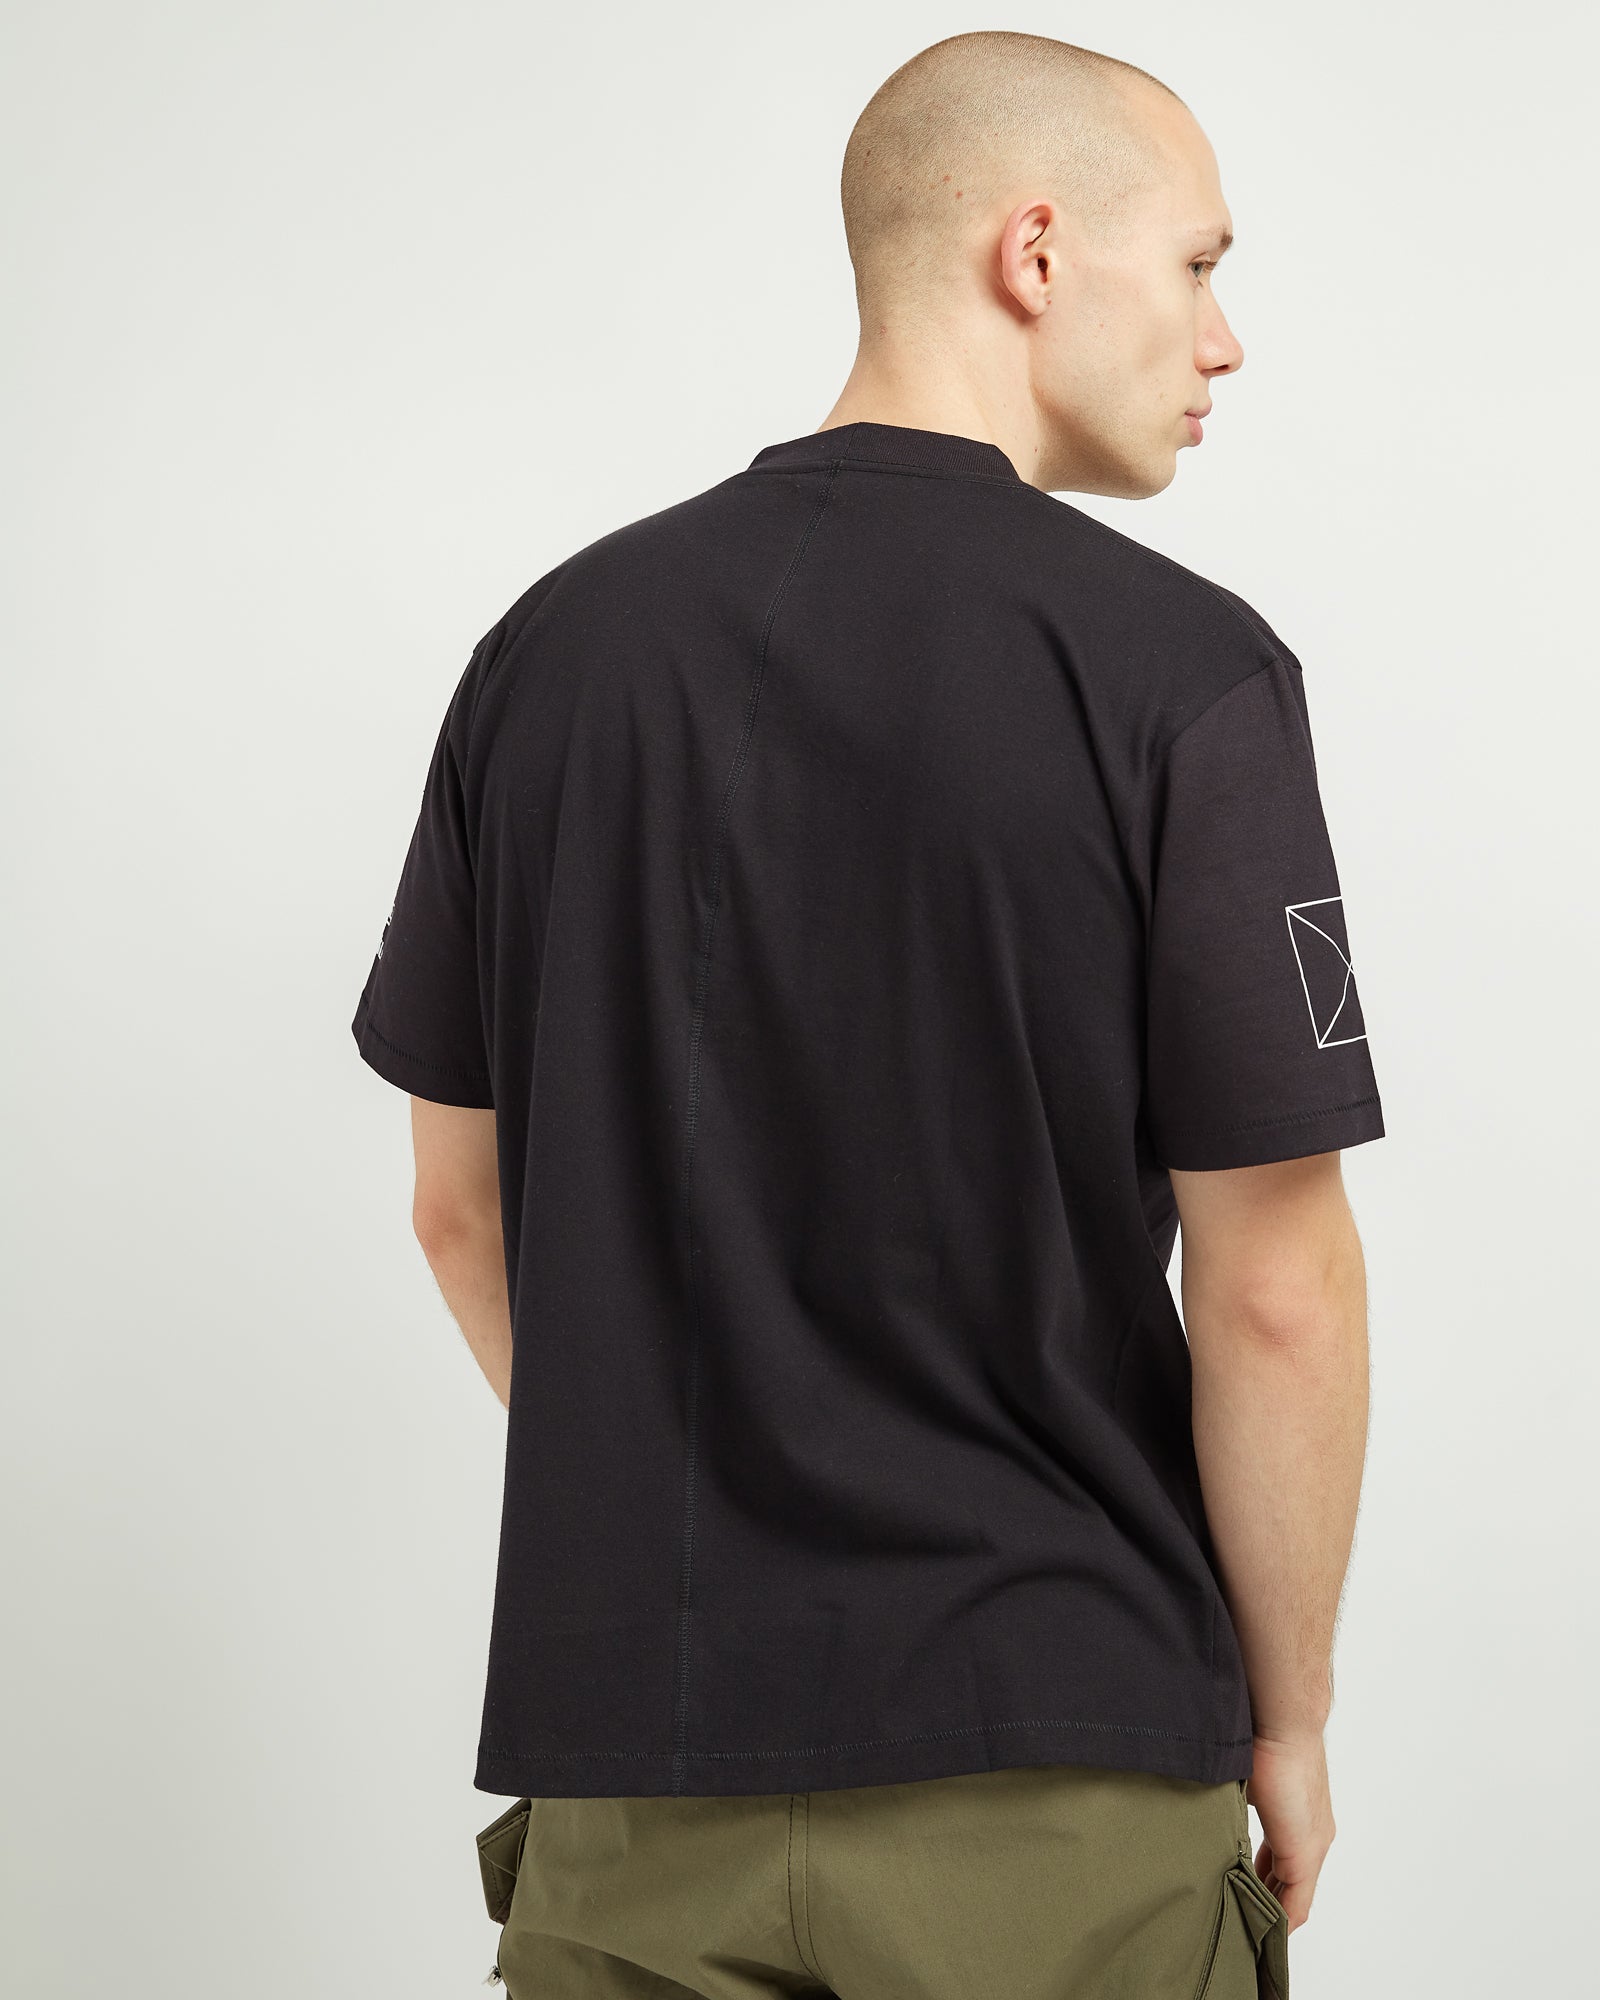 Ocean Plastic Mapping T-Shirt in Black